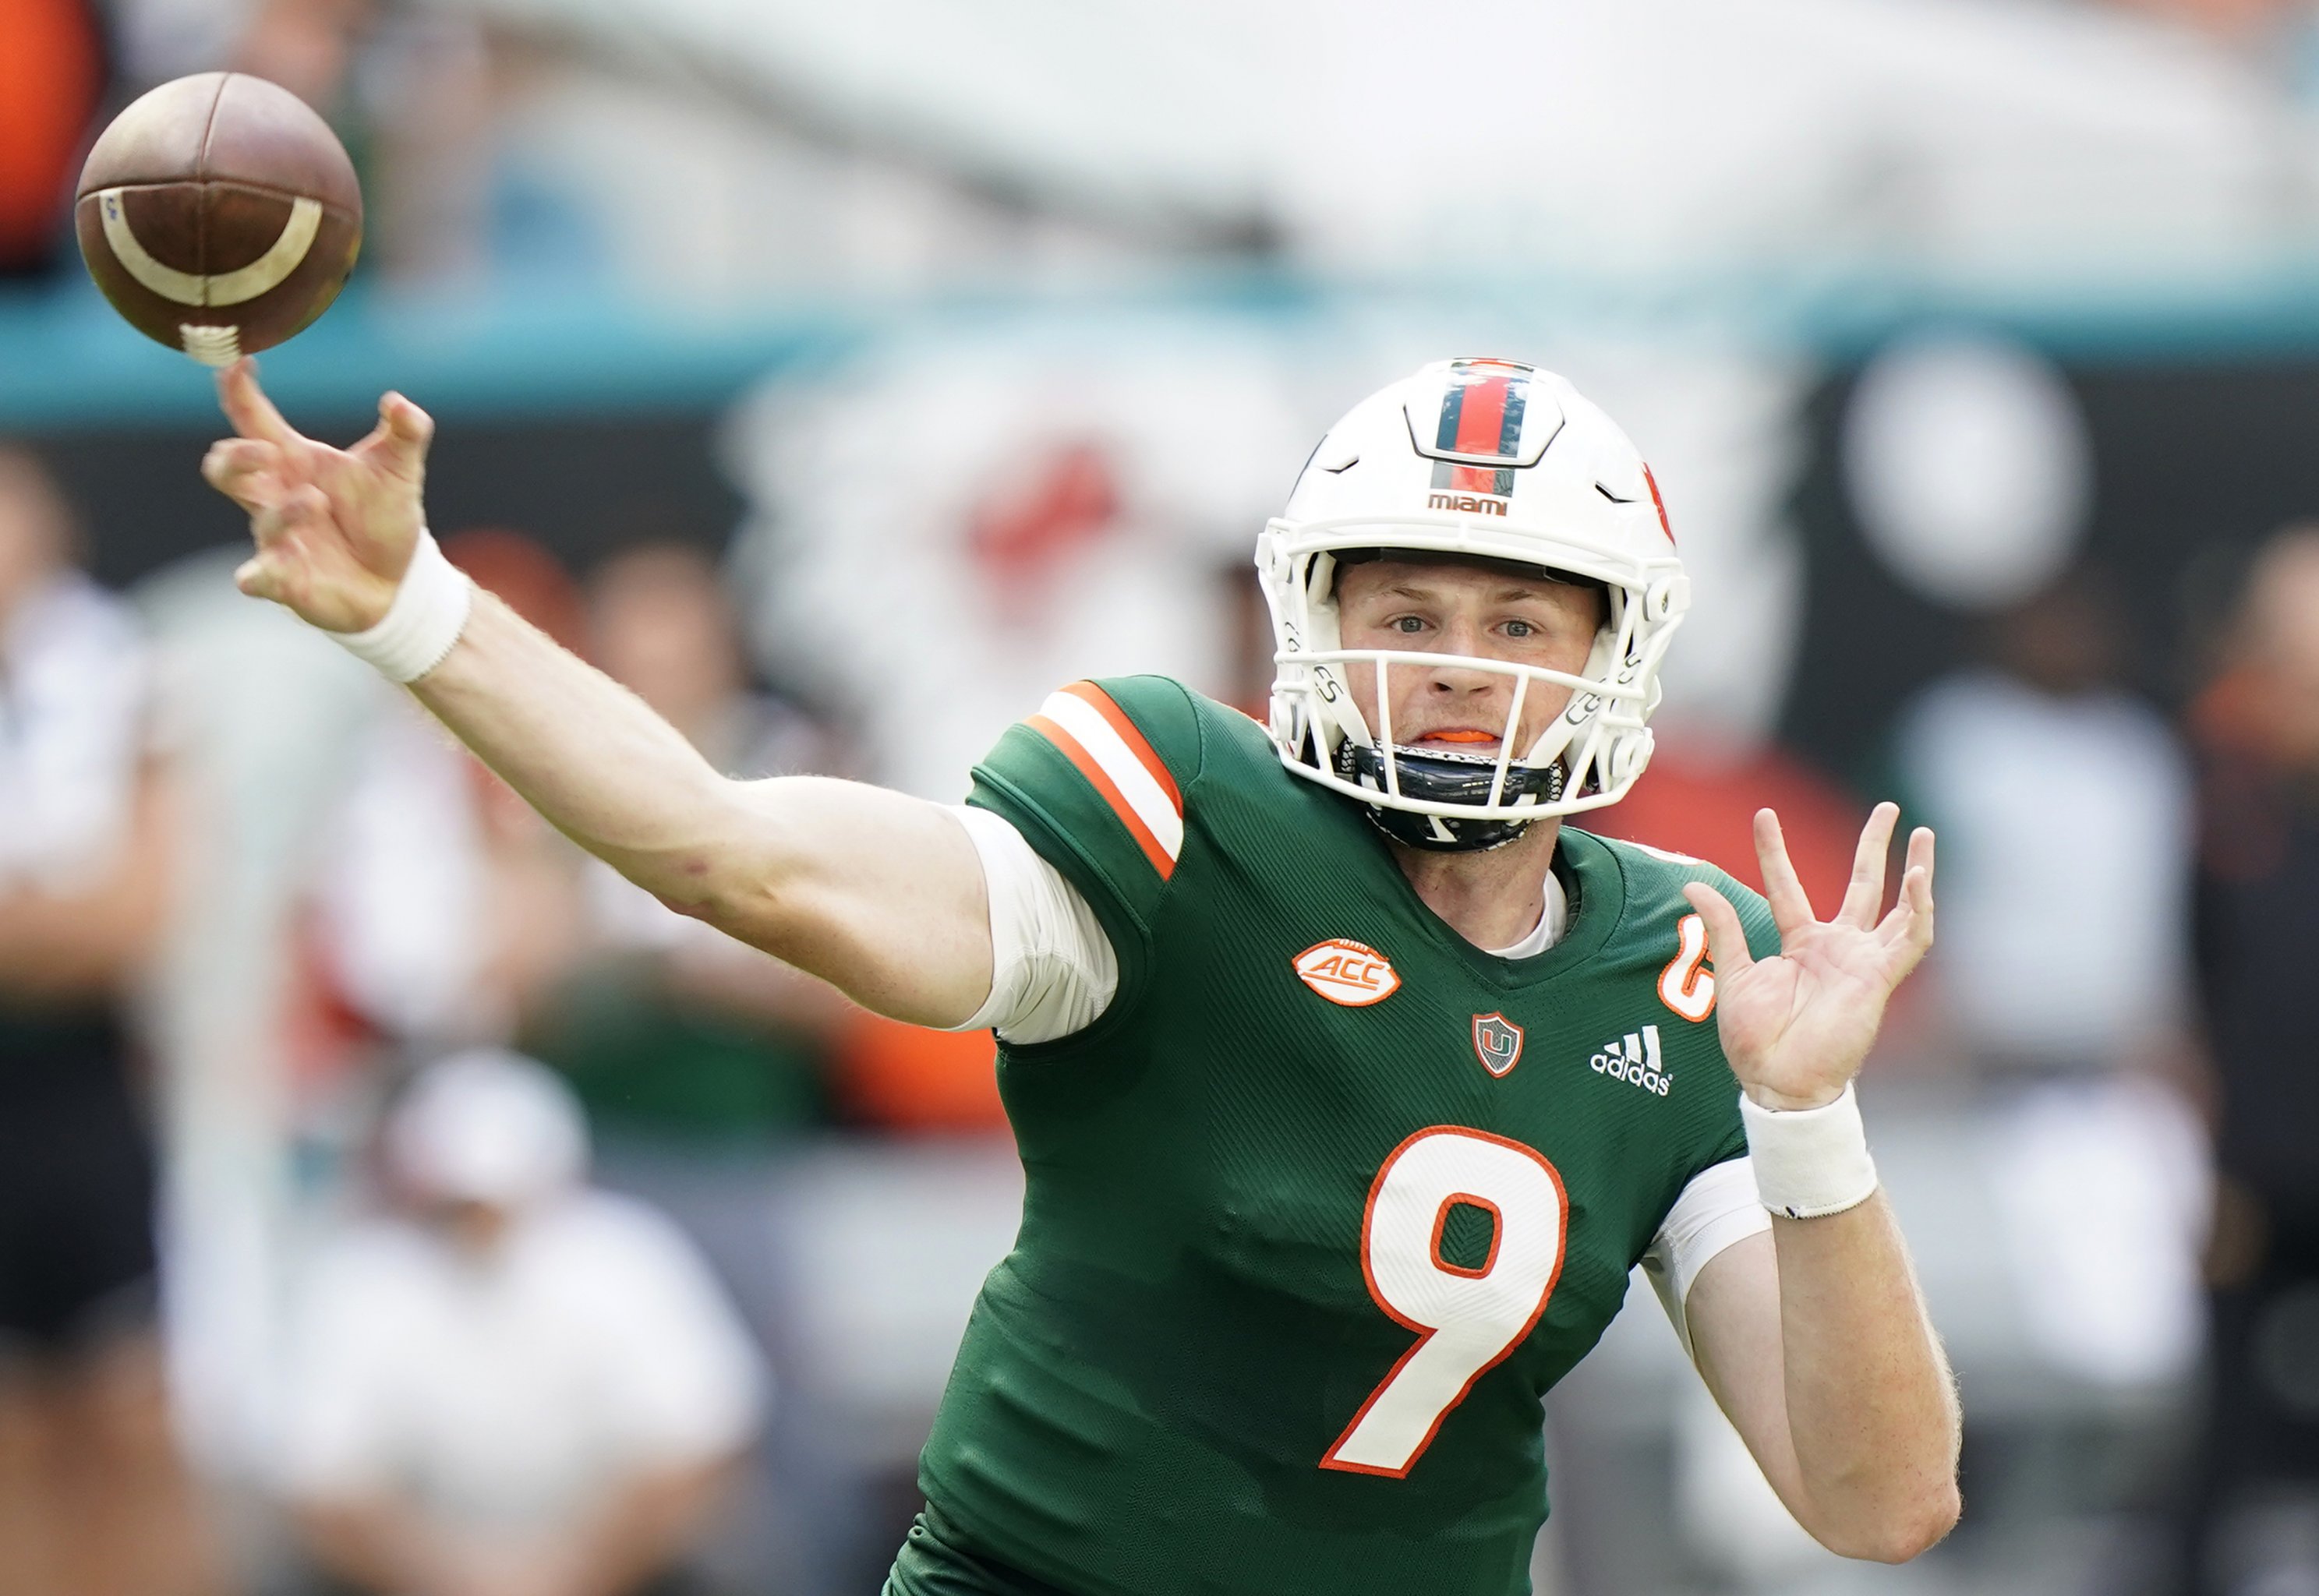 Which Top QB Fits Colts Best In 2023 NFL Draft?